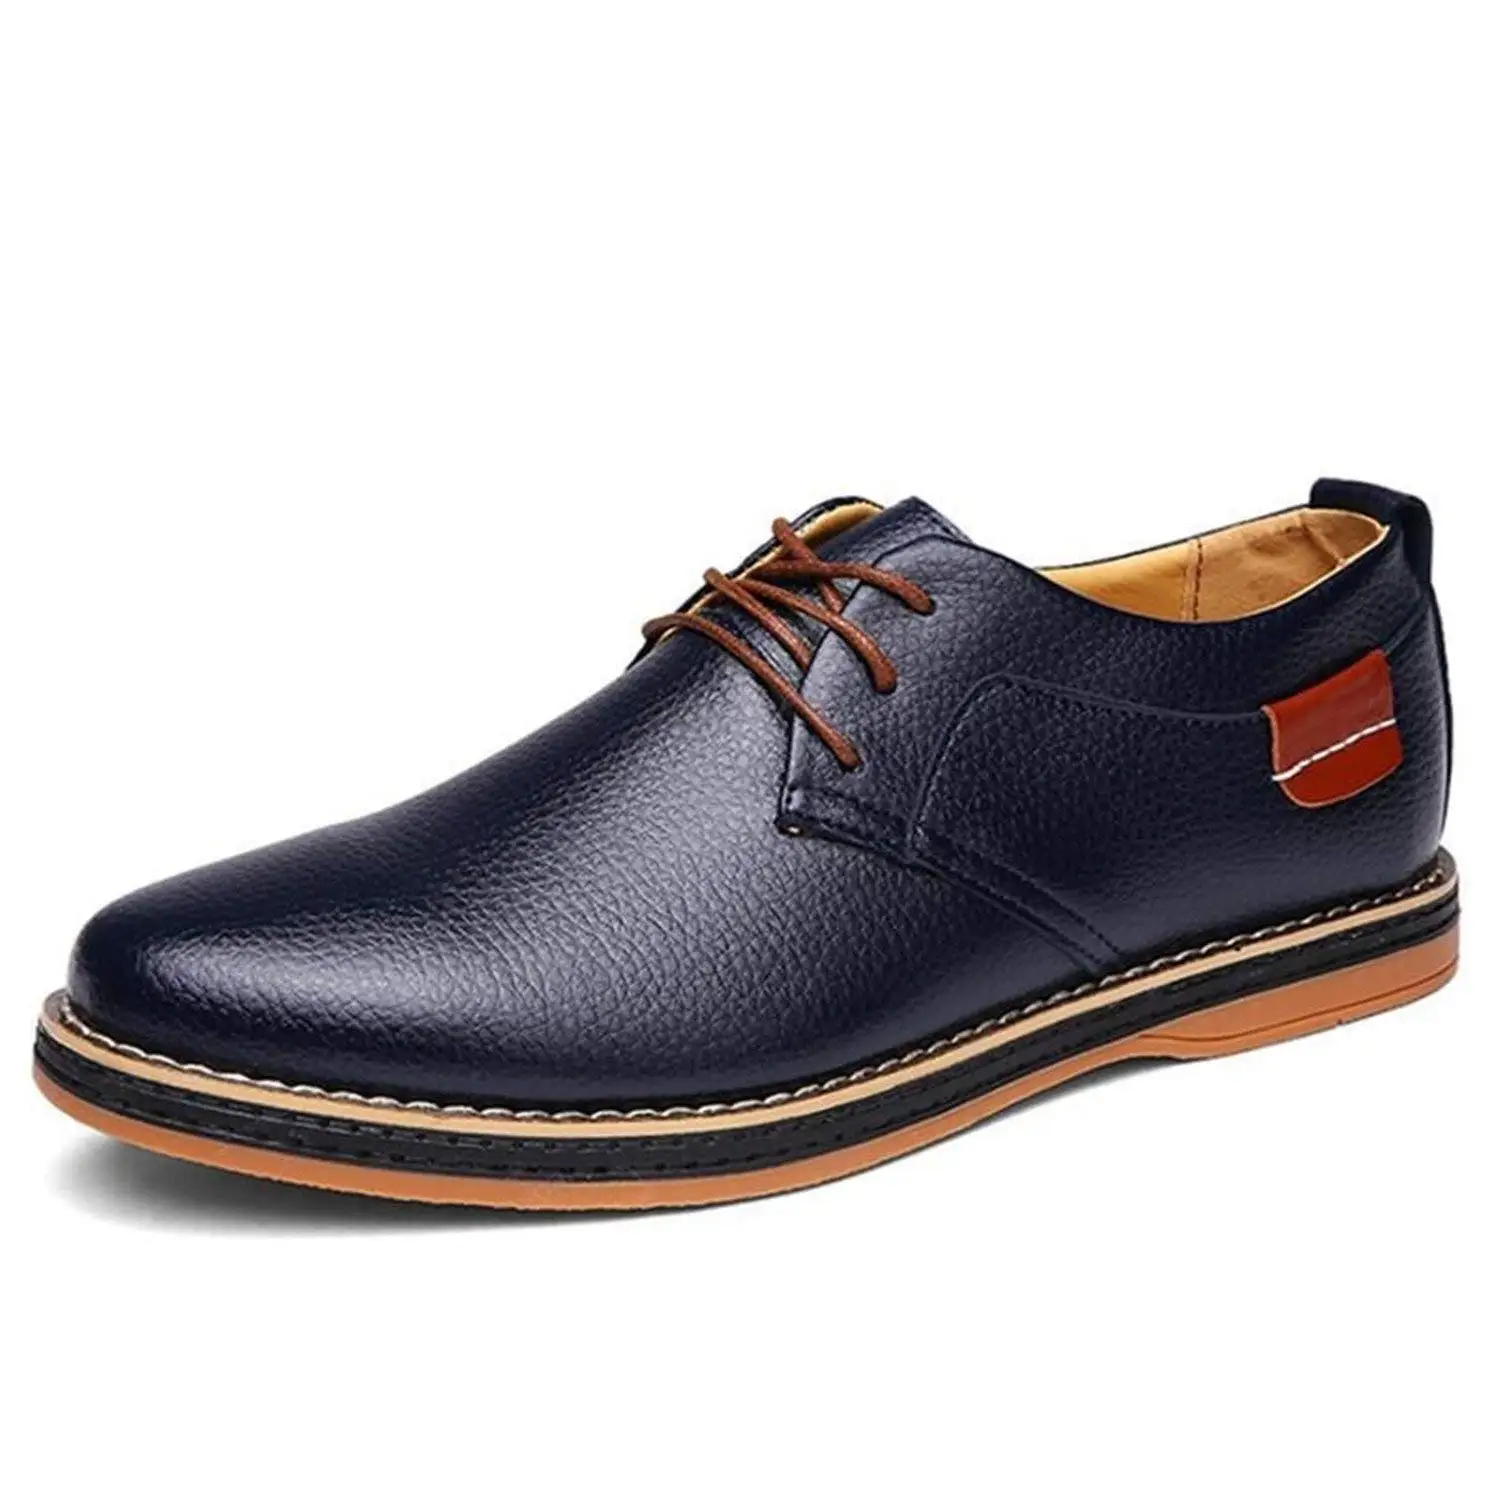 Cheap Formal Shoes Brand, find Formal Shoes Brand deals on line at ...